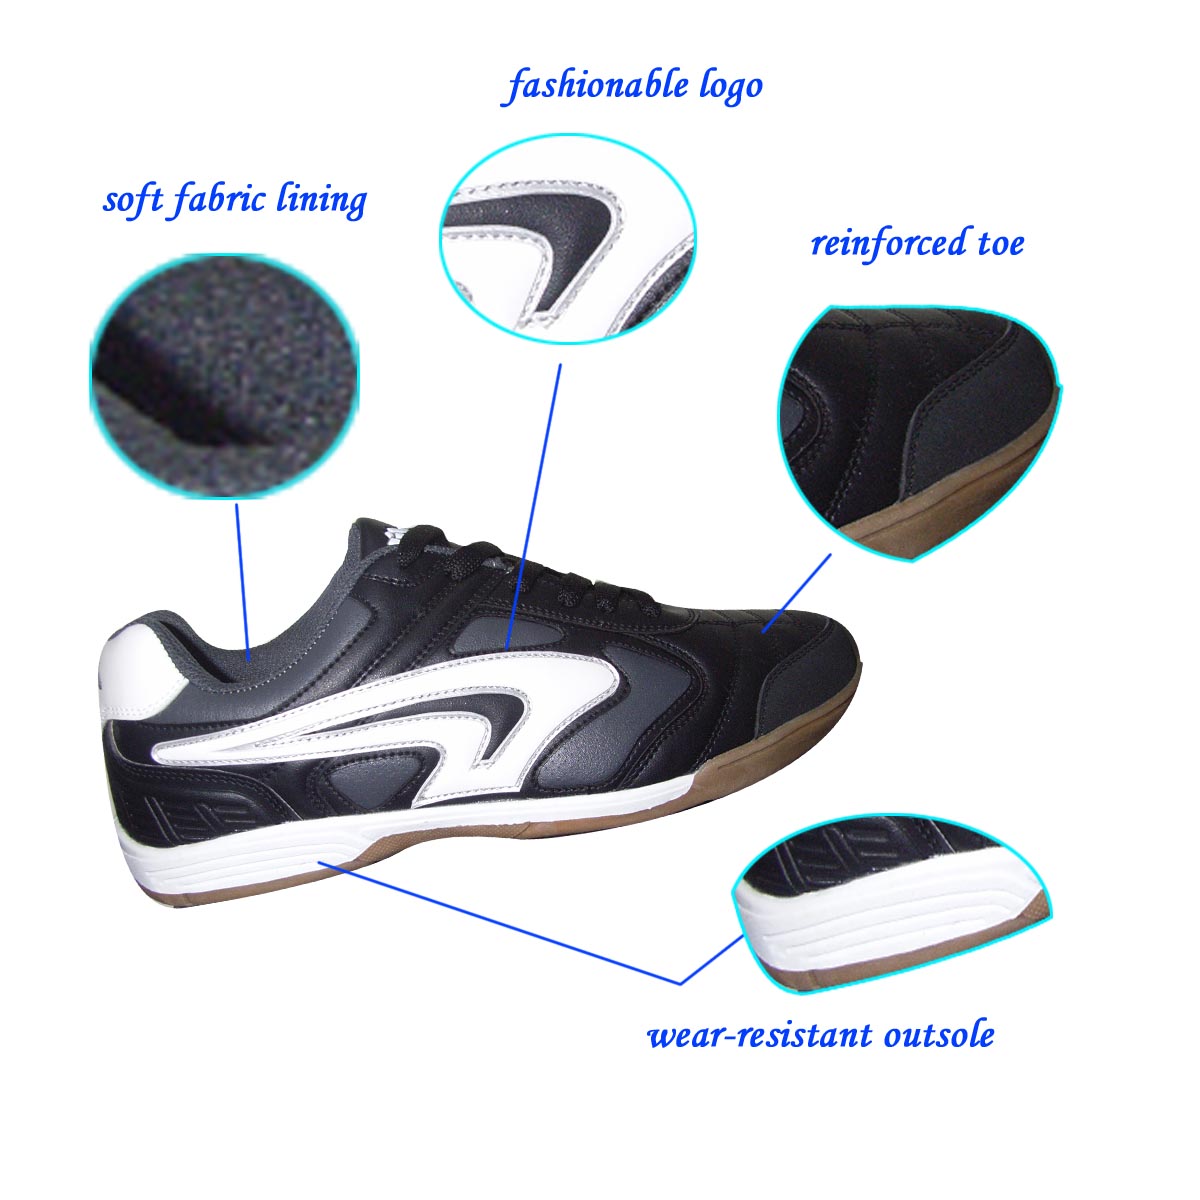 Stylish Designed Wholesale Cheap Black Sports Soccer/ Football Shoes for Men